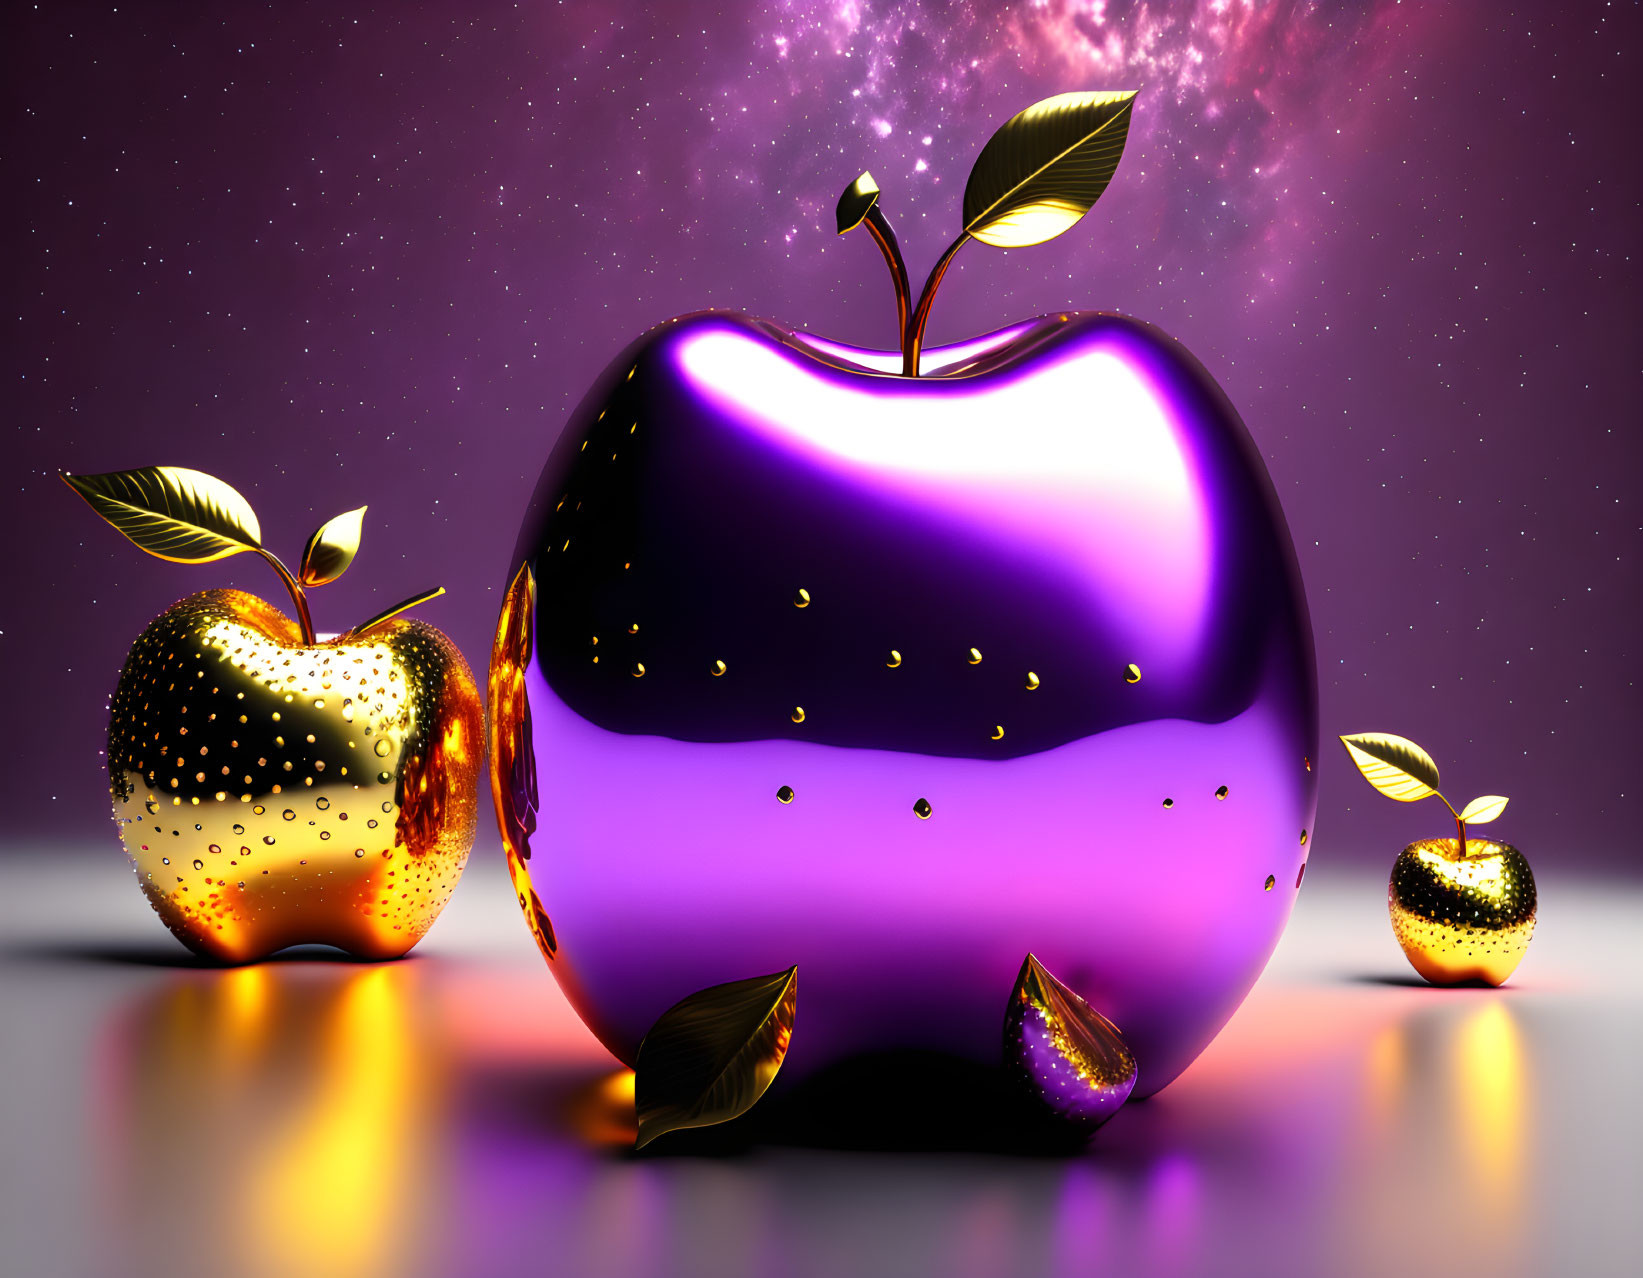 Stylized apples in different sizes and colors on cosmic purple backdrop